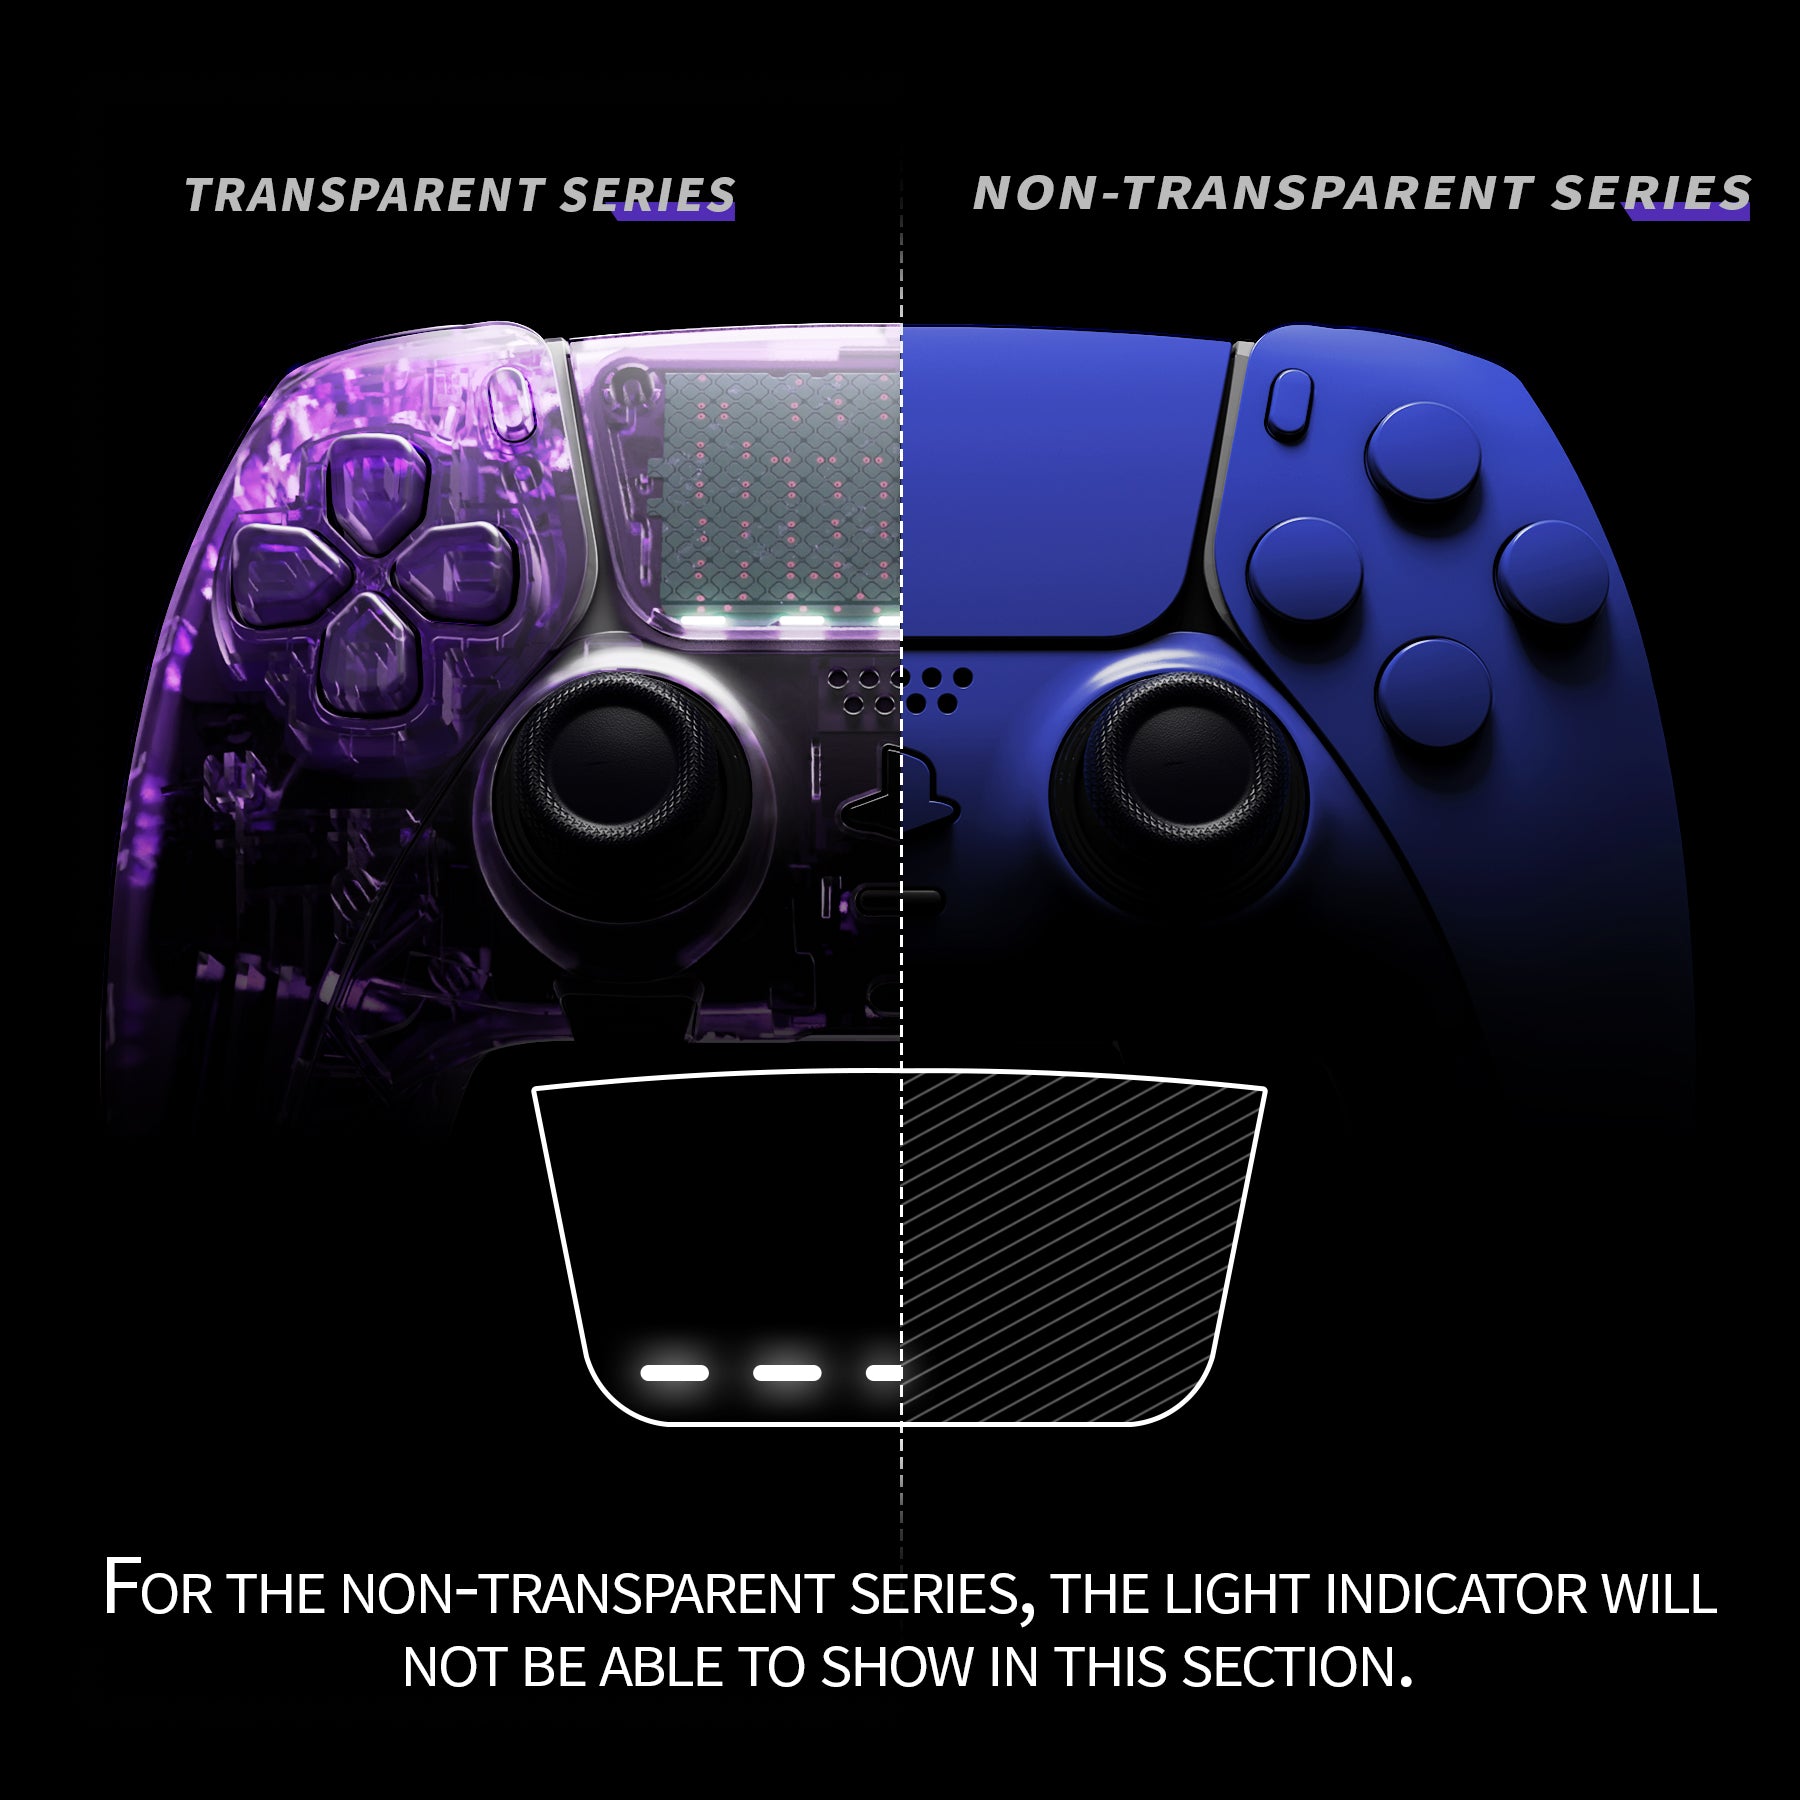 Replacement Full Set Shells with Buttons Compatible with PS5 Edge Controller - Blue eXtremeRate